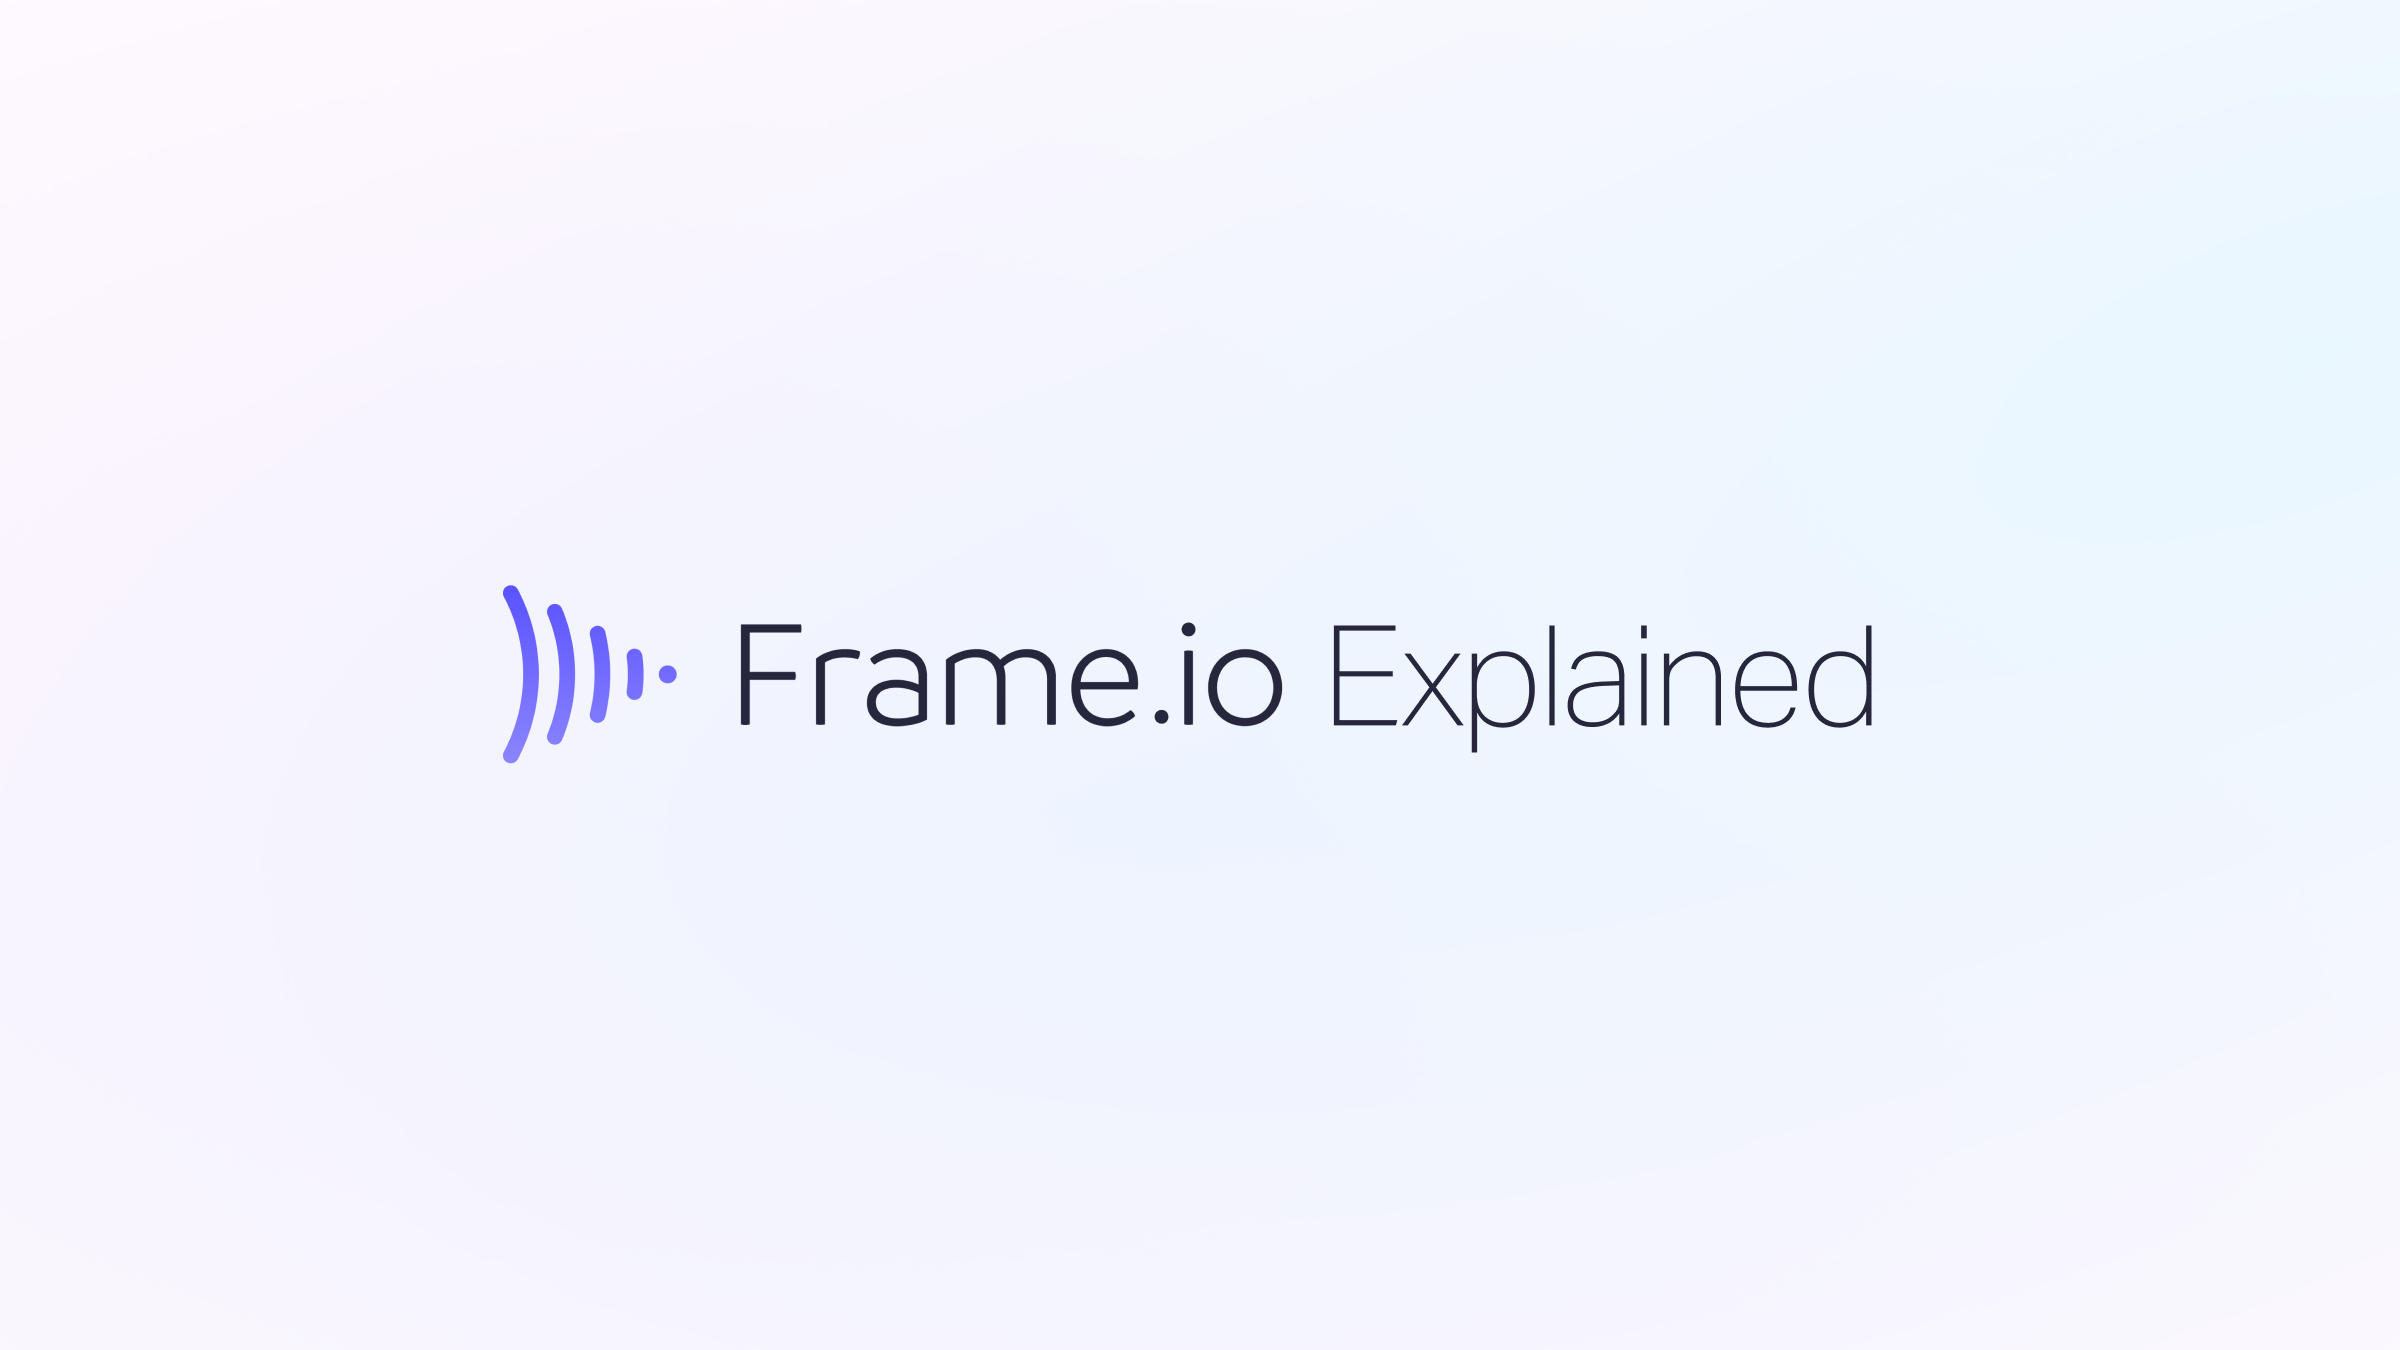 Introducing the Frame.io Explained Video Series